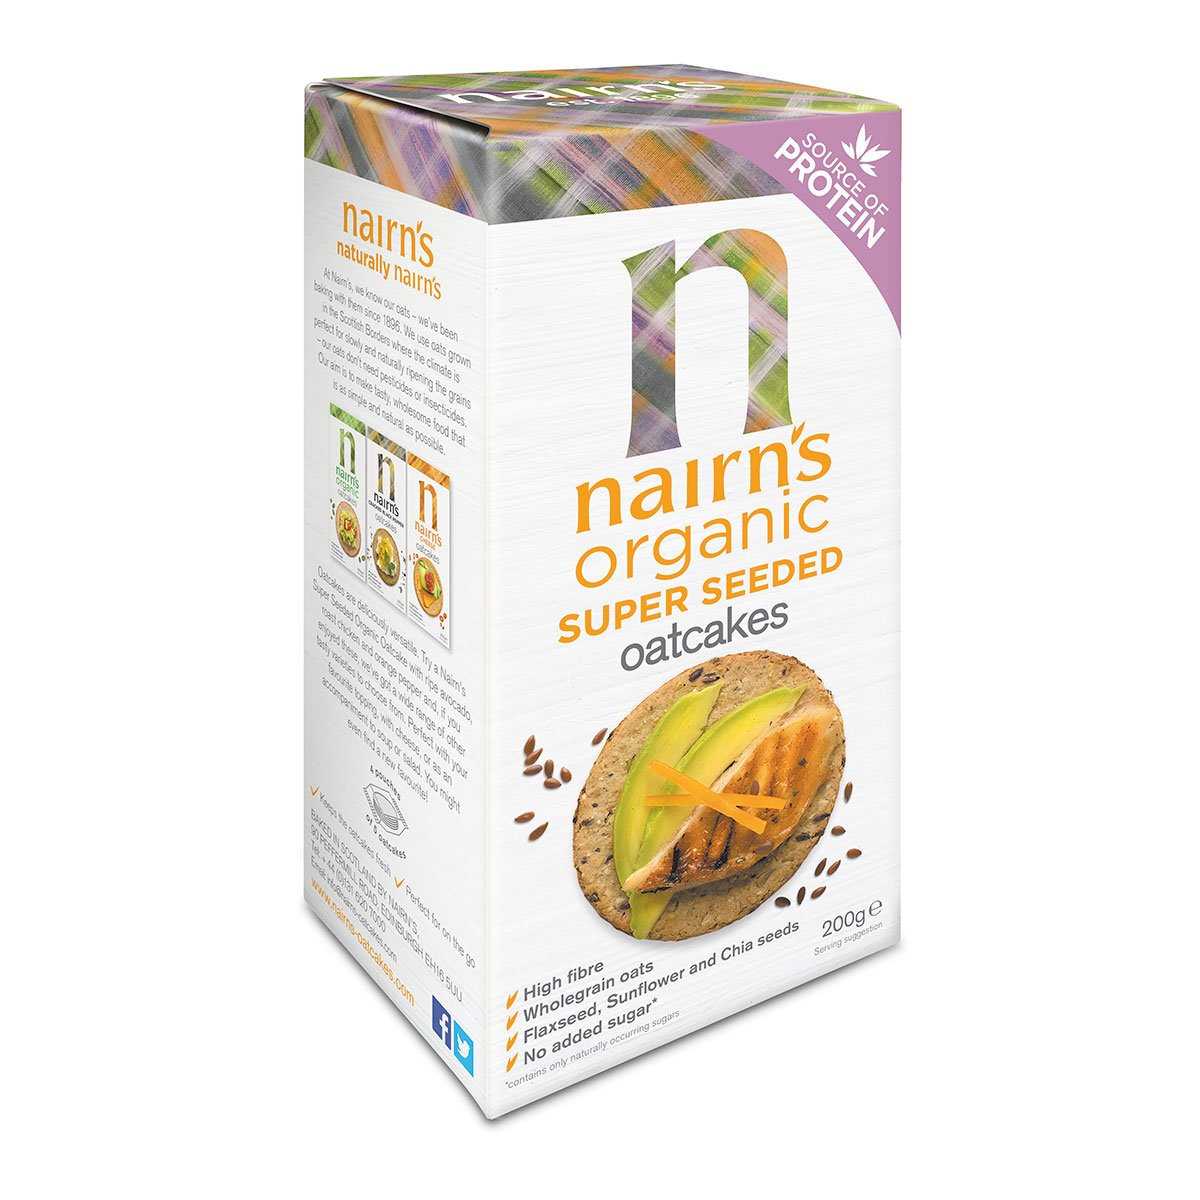 Nairns Super Seeded Organic Oatcakes 200g - Just Natural